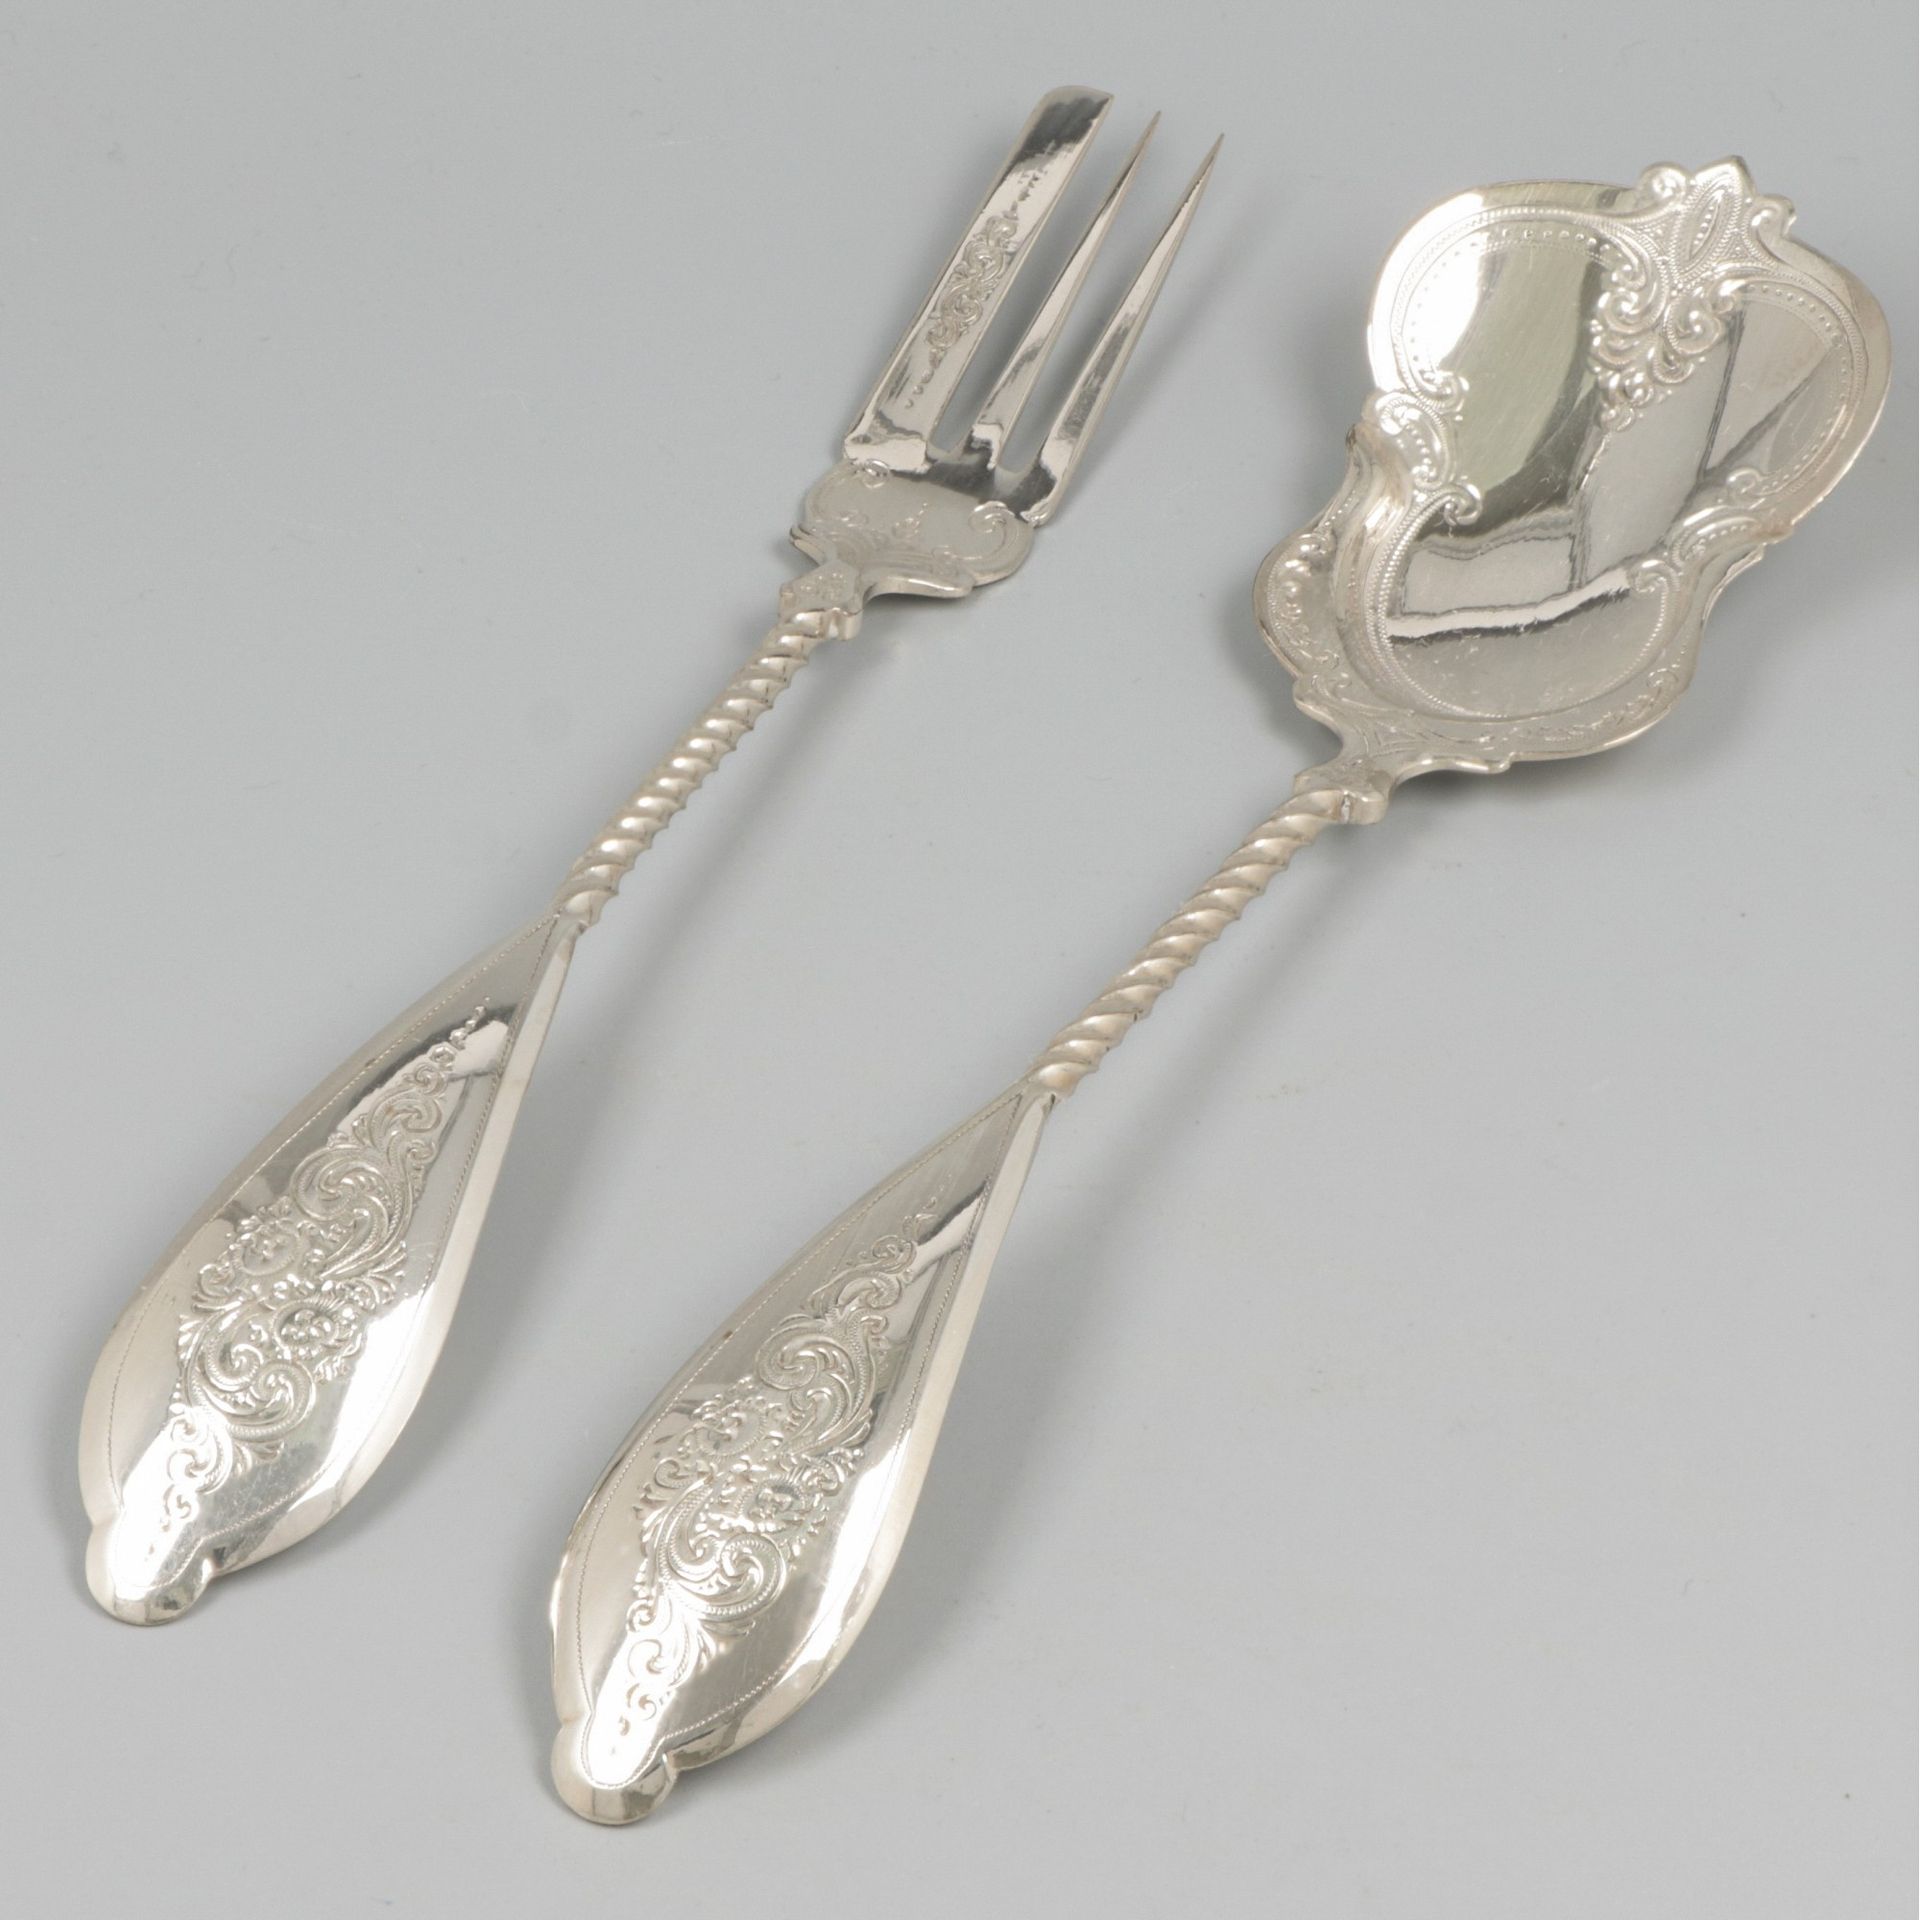 Ginger set silver. Equipped with twisted stem and engraved Biedermeier decoratio&hellip;